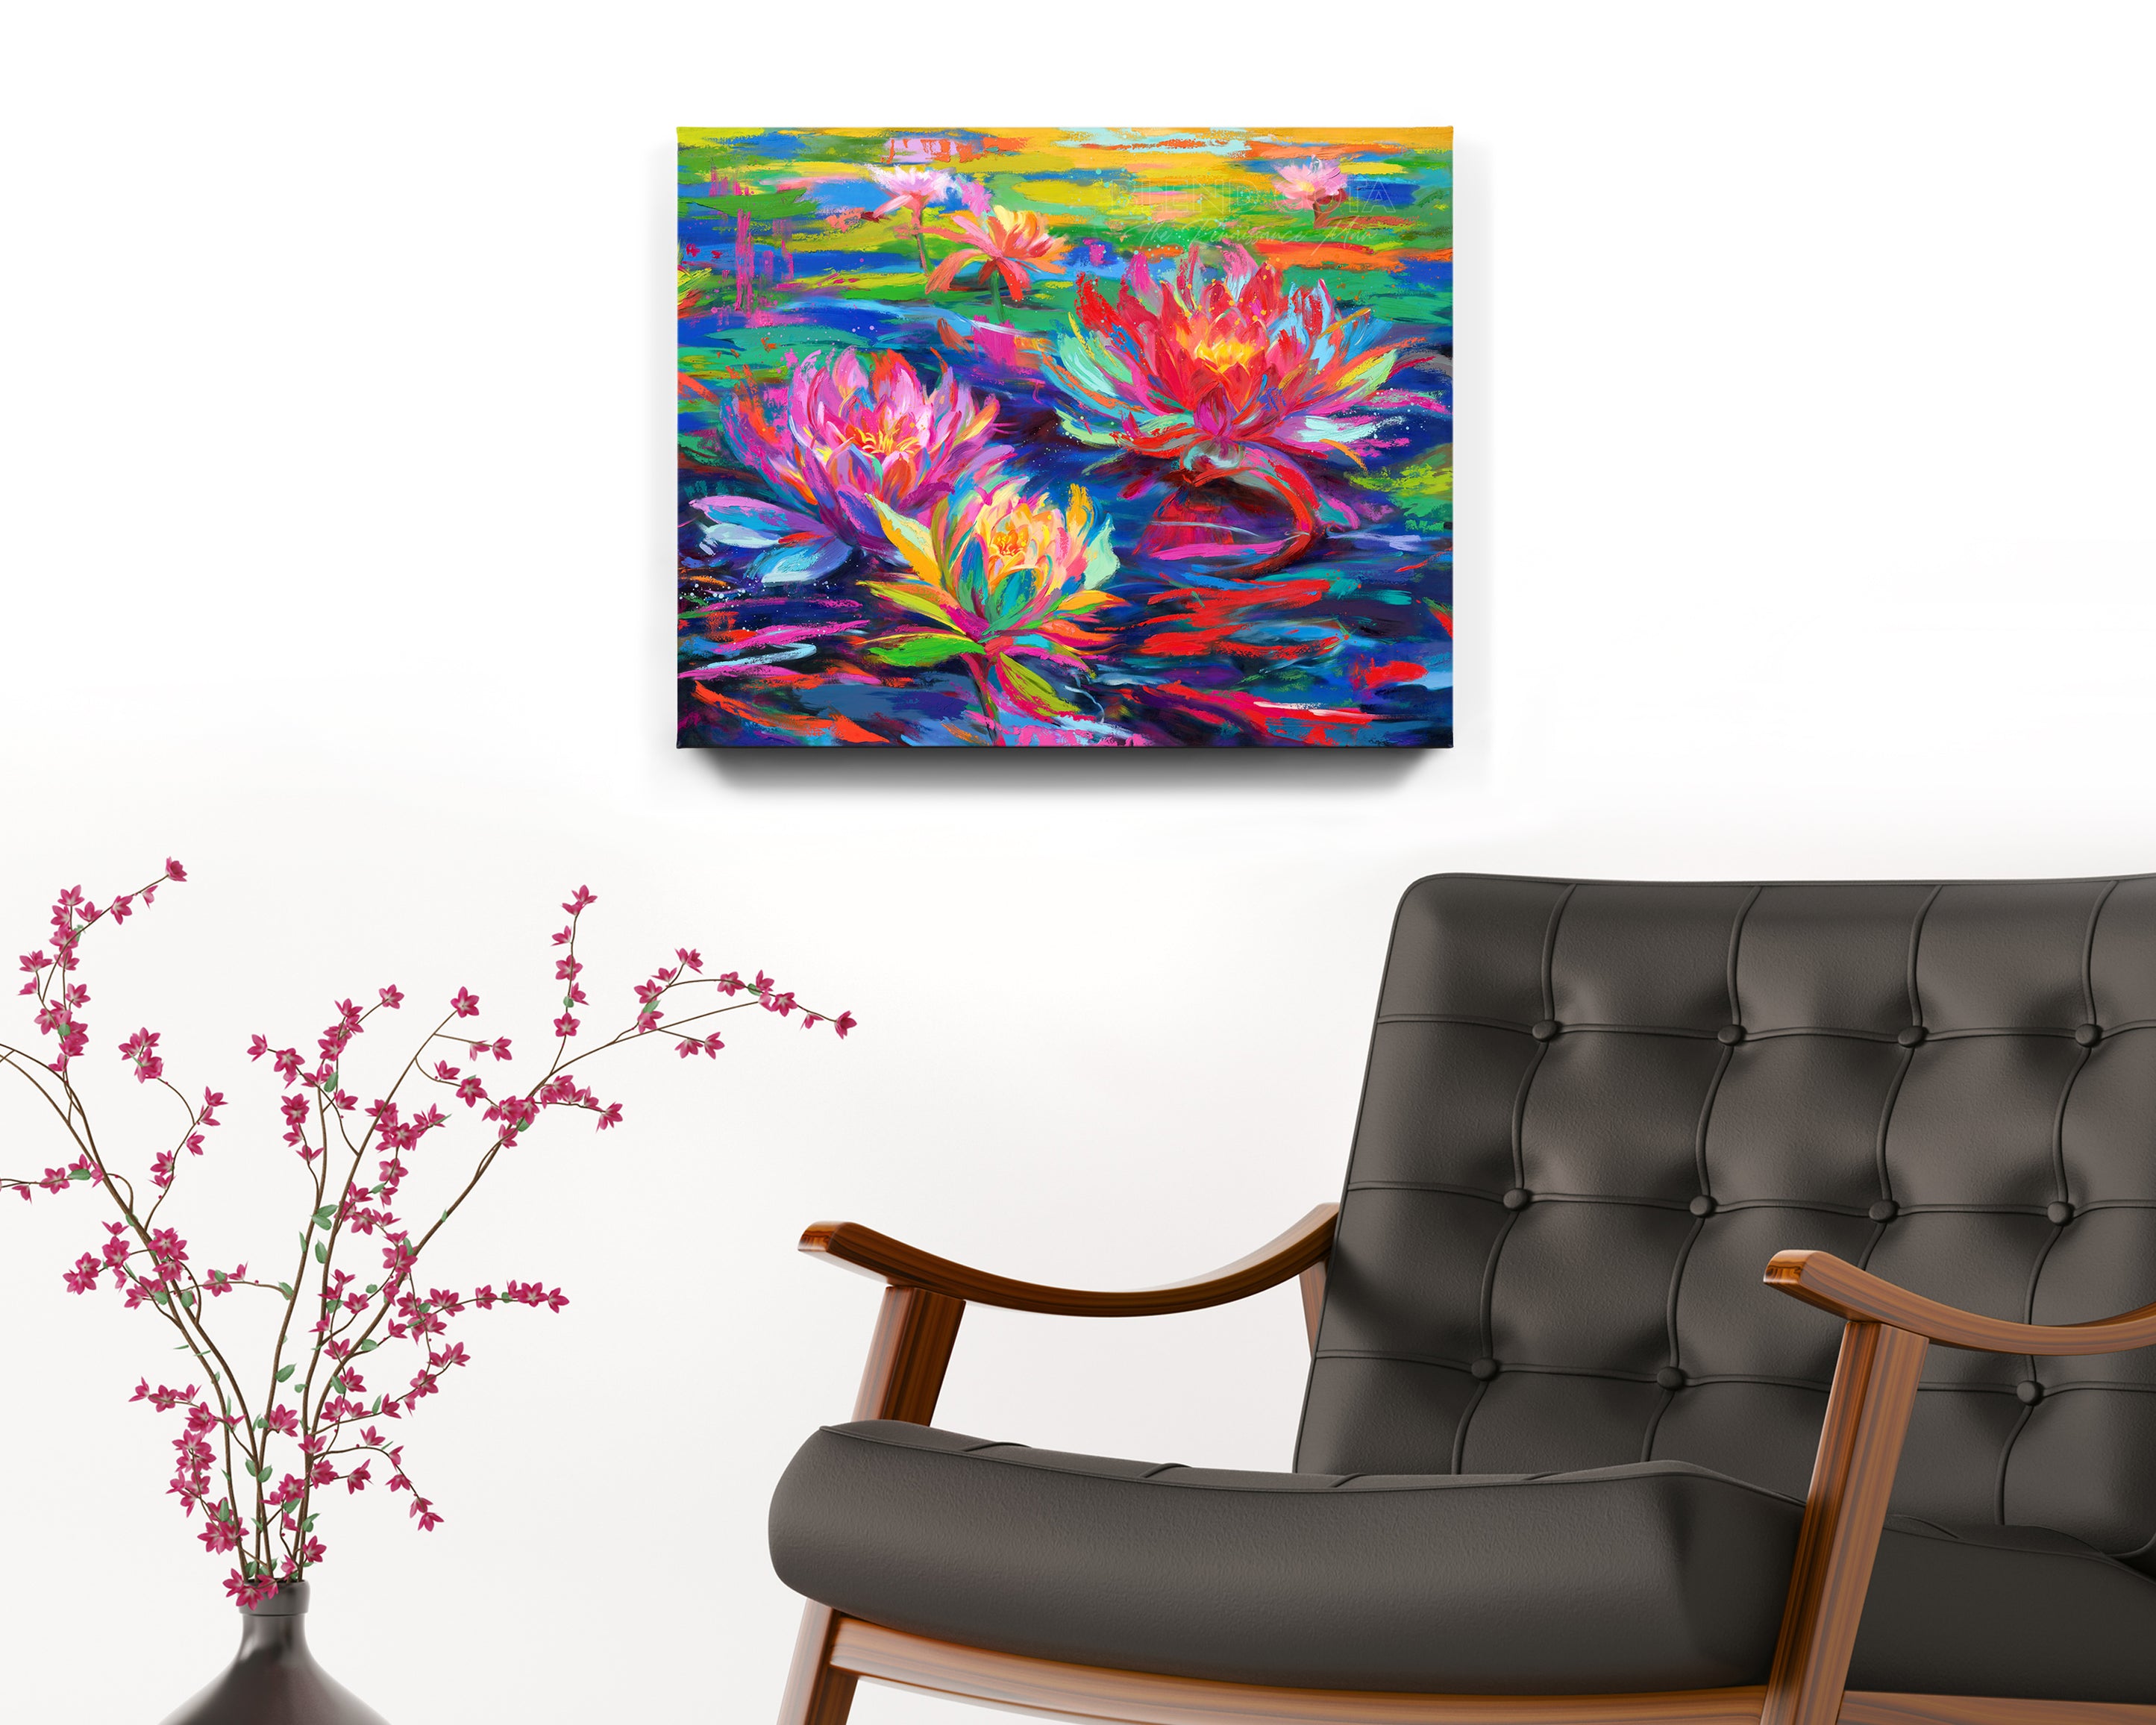 Art print of red, pink and yellow water lilies blooming in a pond of lily pads, abundant and vibrant flowers in colorful brushstrokes, color expressionism style in a room setting.